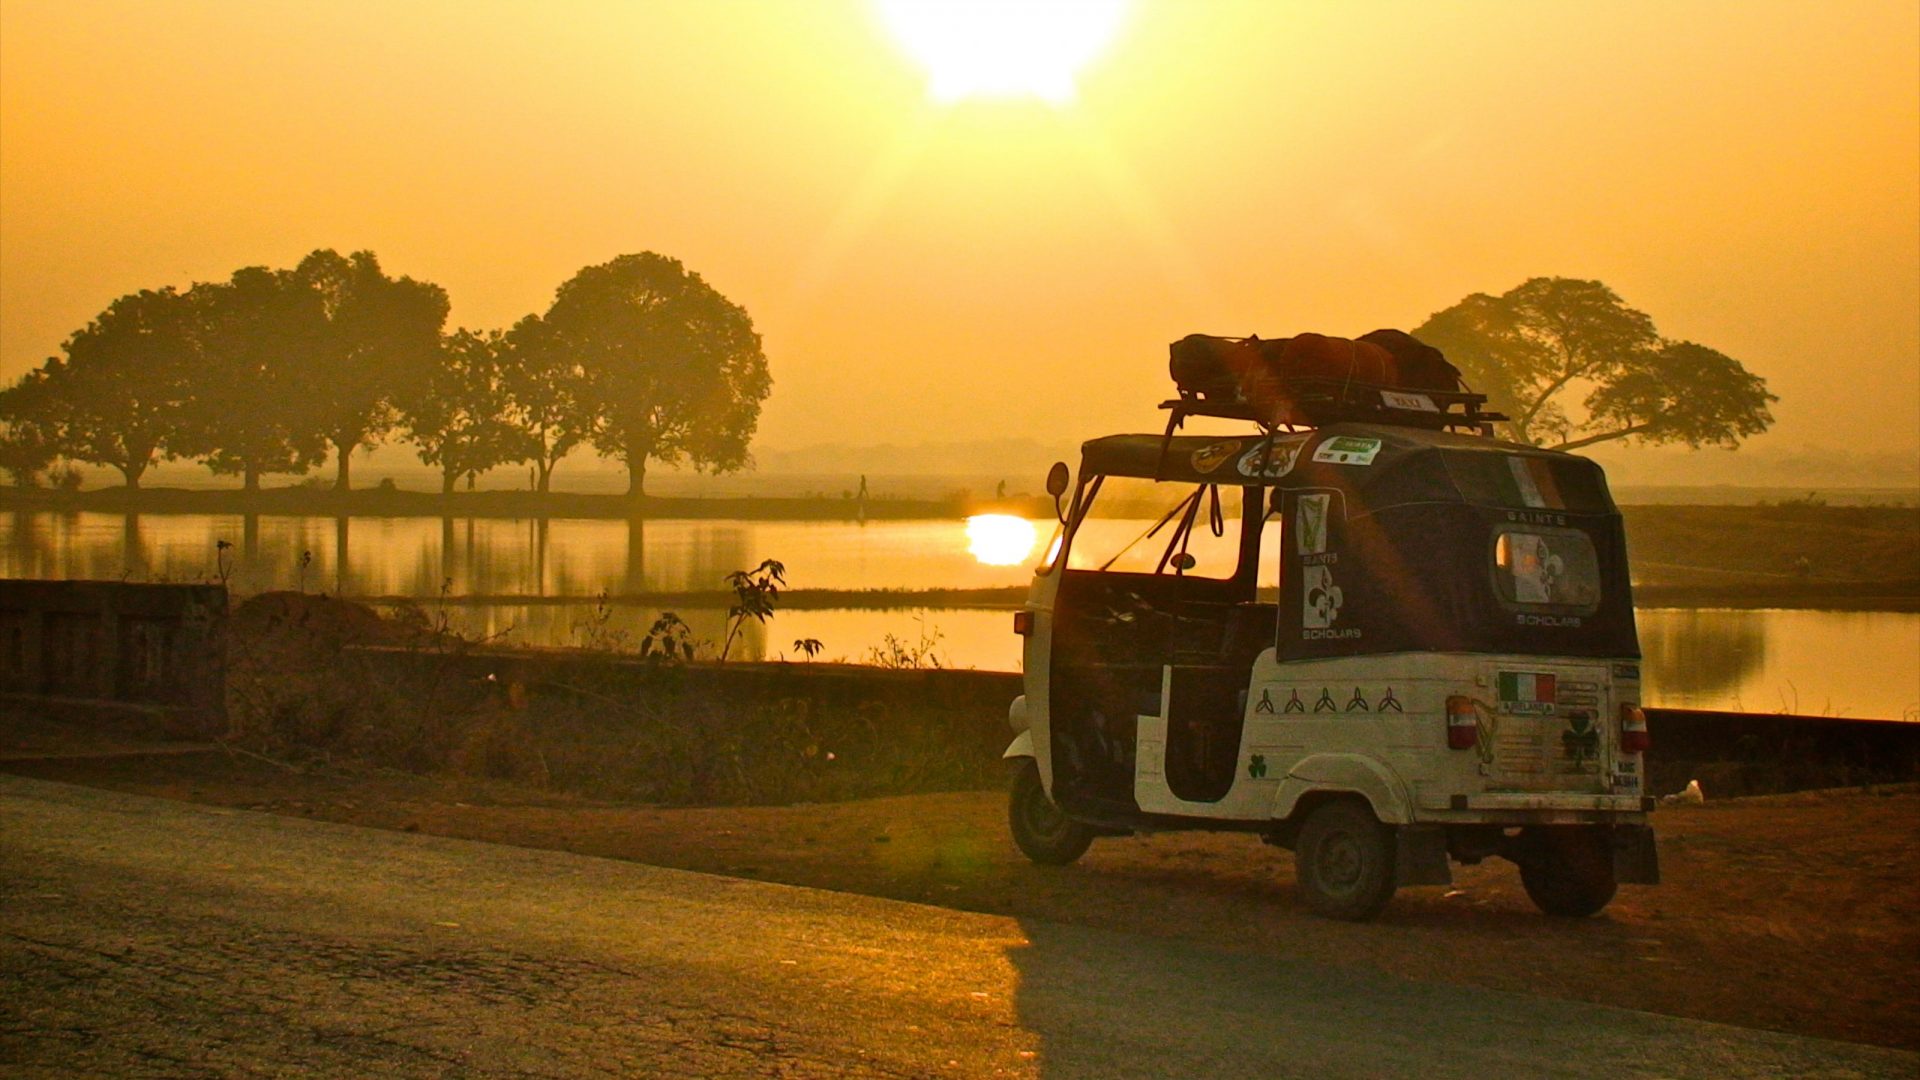 An auto rickshaw at the side of the road at sunrise.